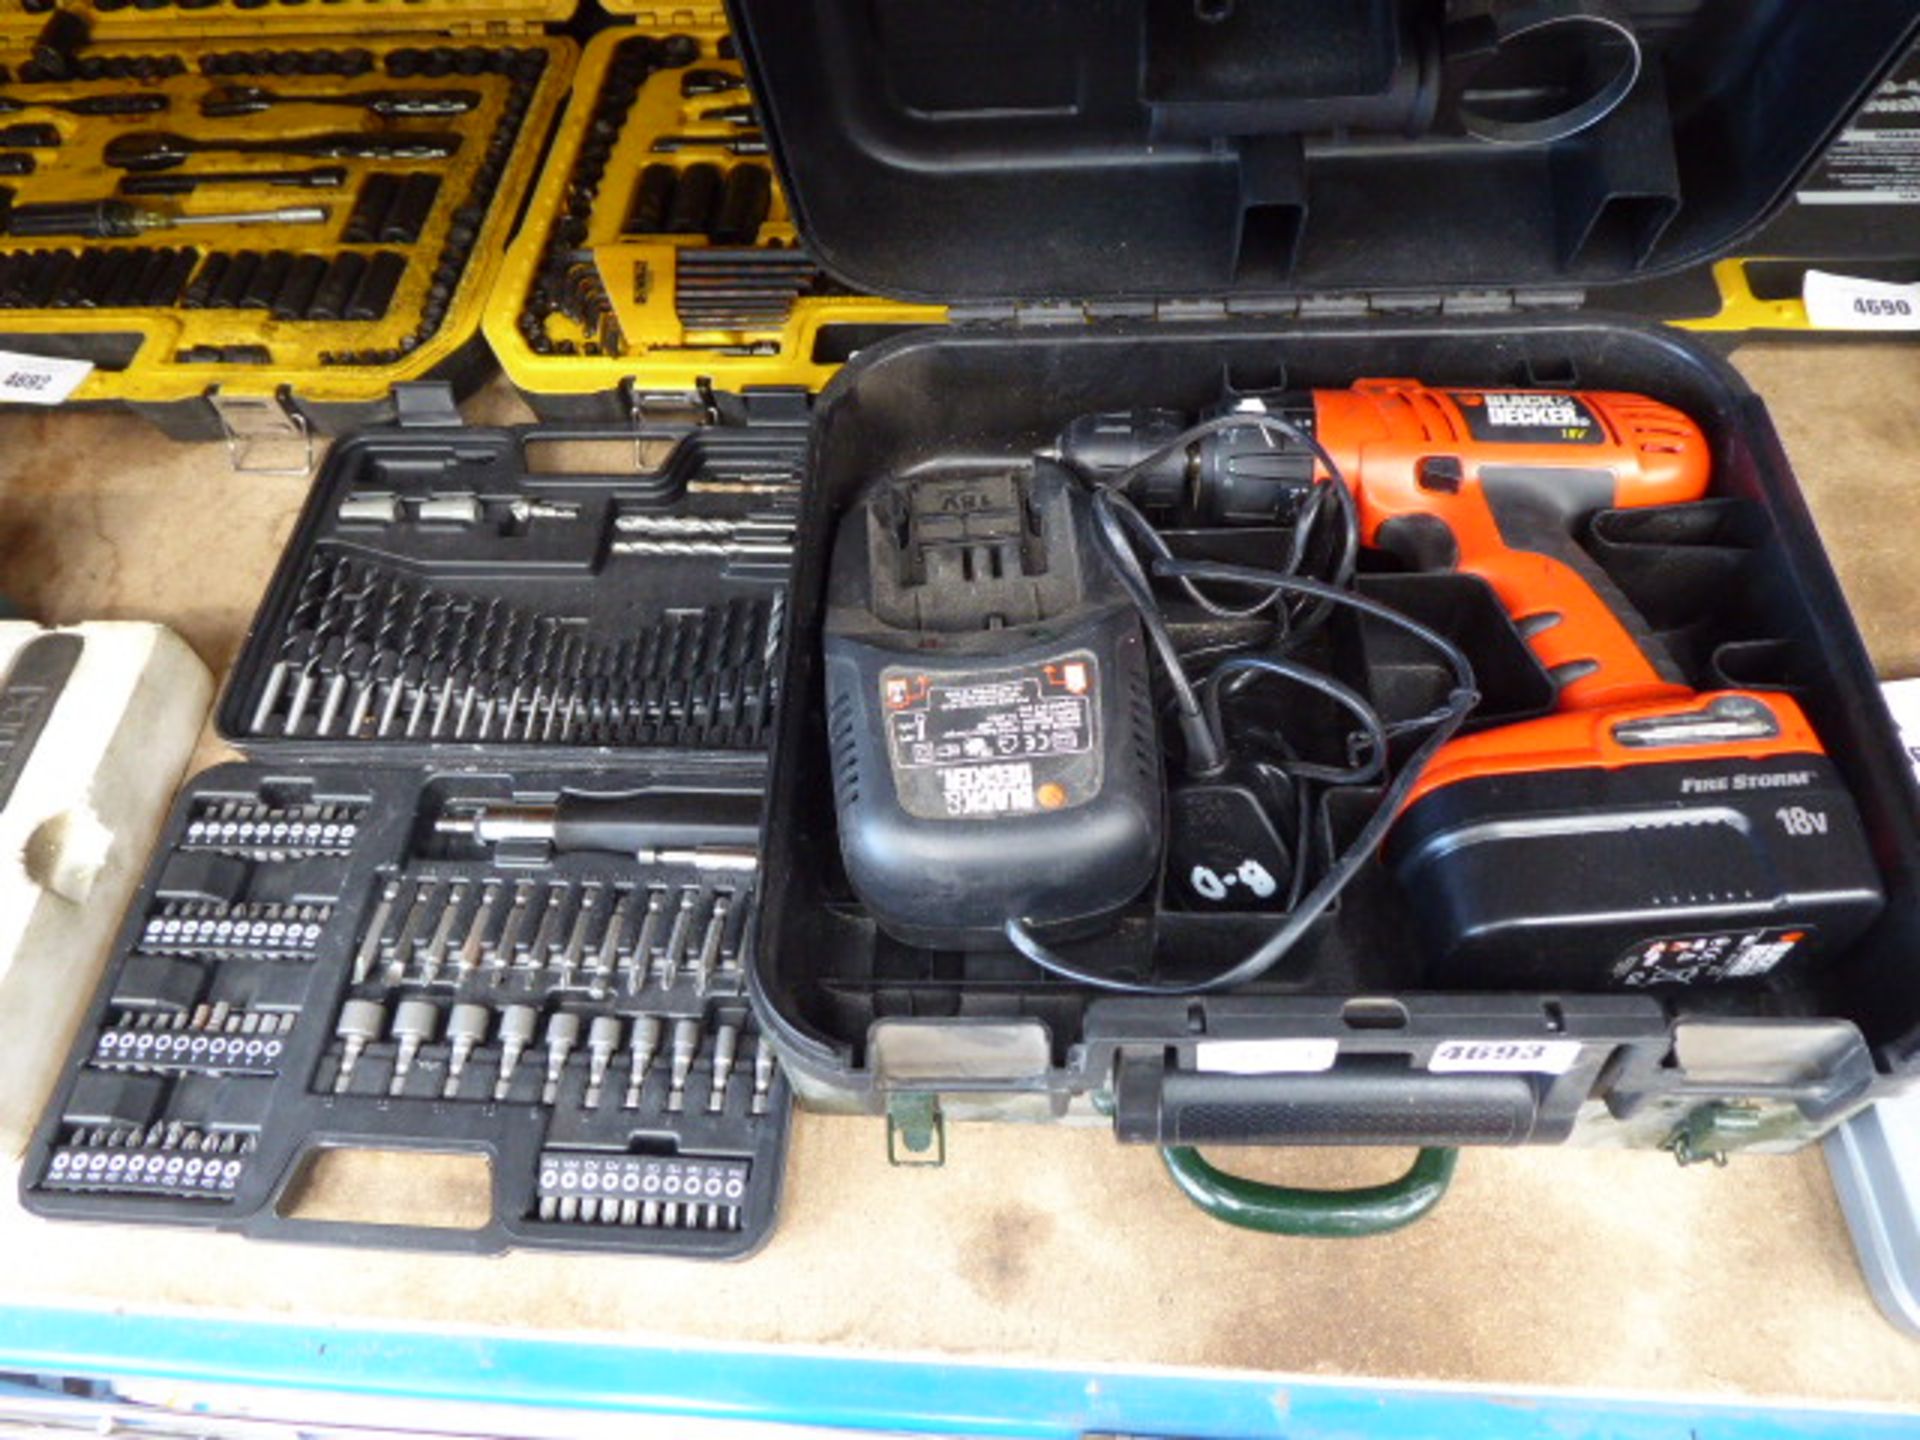 Small screwdriver bit set, Black & Decker drill and a green box containing a quantity of spanners